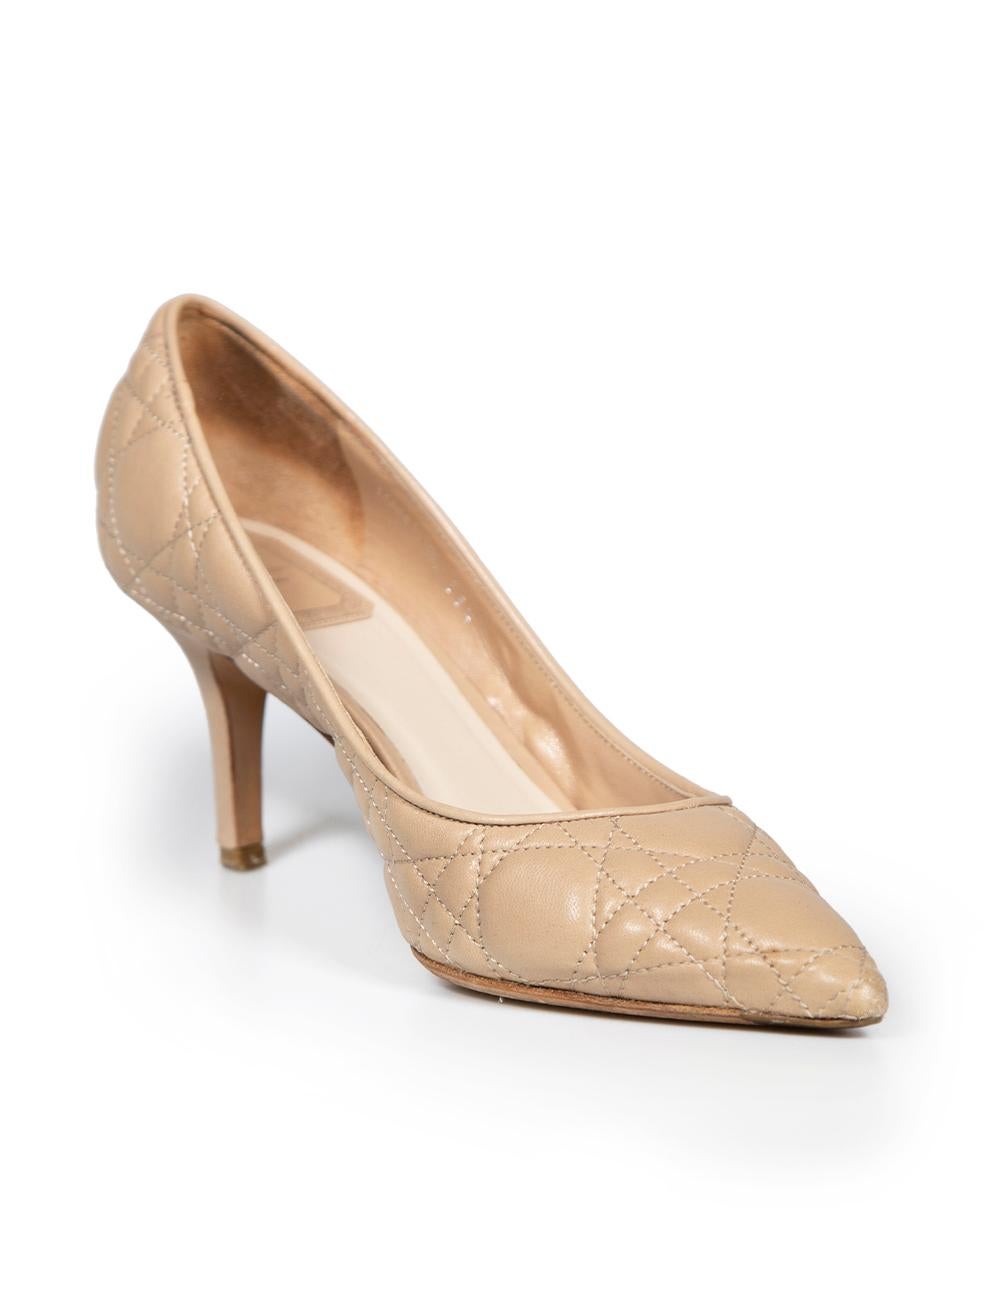 CONDITION is Good. Minor wear to heels is evident. Light wear to upper, where there are small marks to the quilted leather. There are abrasions to the leather pointed tips and heel tips. There are indents to the leather heel and general wear to the